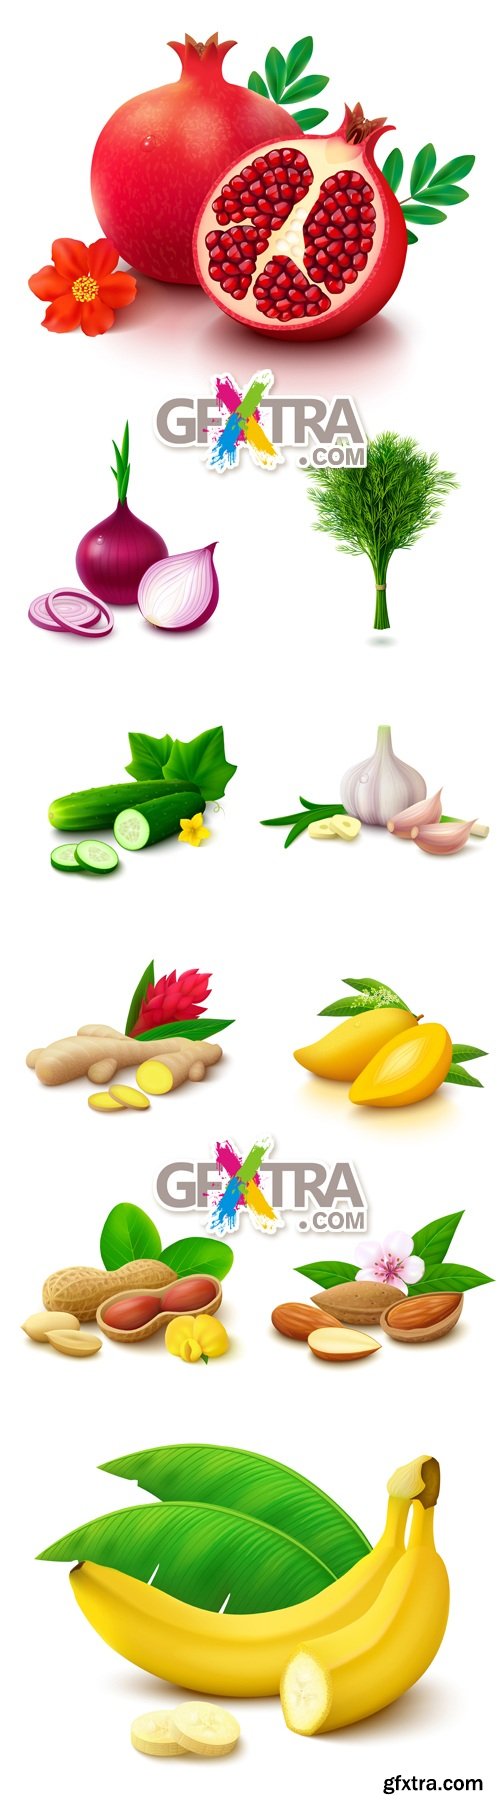 Fruits & Vegetables Isolated Vector